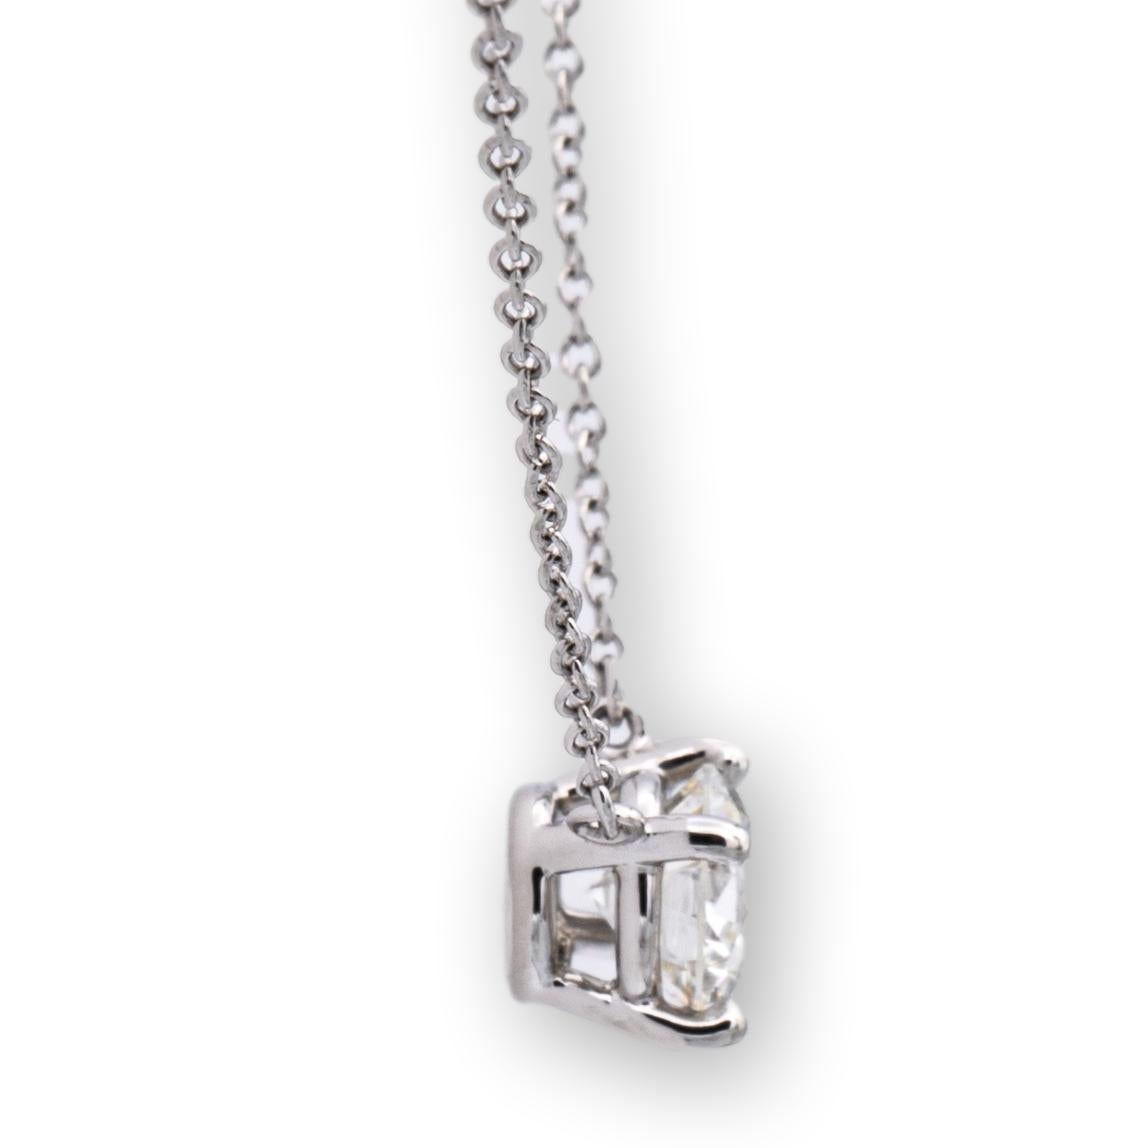 Tiffany & Co. Diamond Solitaire pendant finely crafted in platinum with a round brilliant cut diamond center weighing 1.04 carats J color VVS2 clarity. The diamond is set in a 4 prong basket setting hanging off a 16